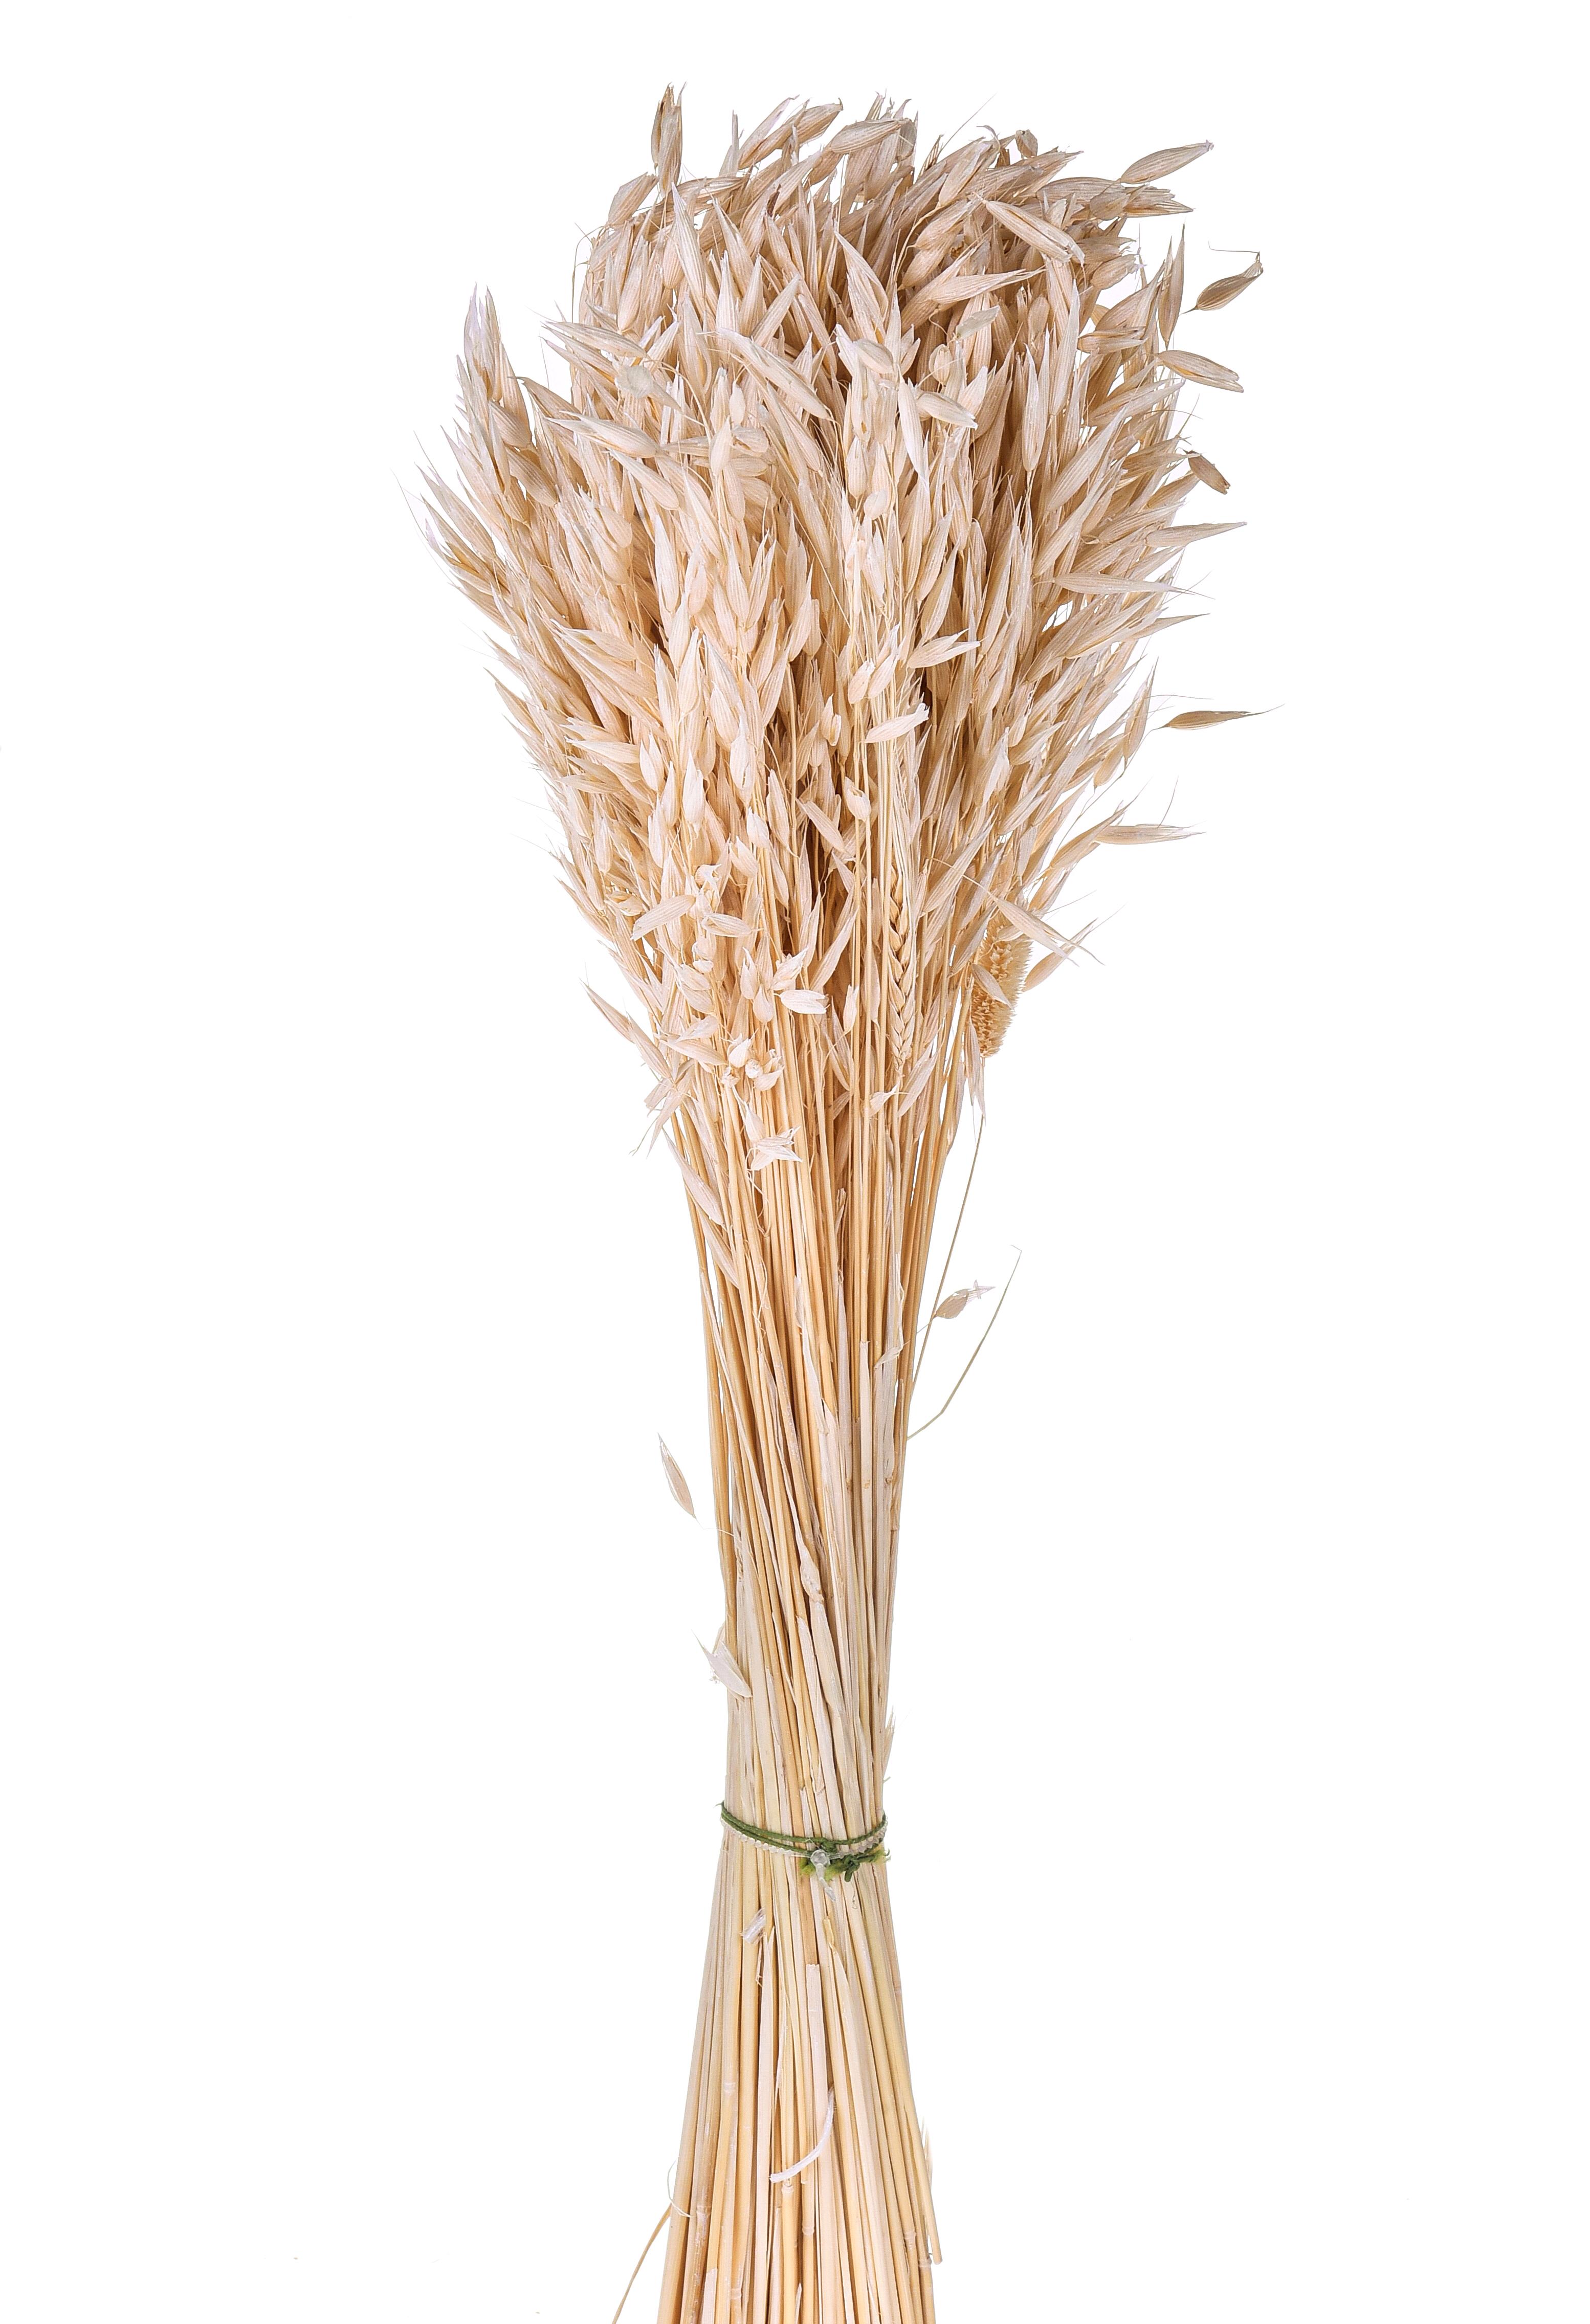 NATURAL PRODUCTS DRIED FLOWERS AND ERBS, COLORED GRASS AND FLOWERS, AVENA COLTIVATA SBIANC. A KG